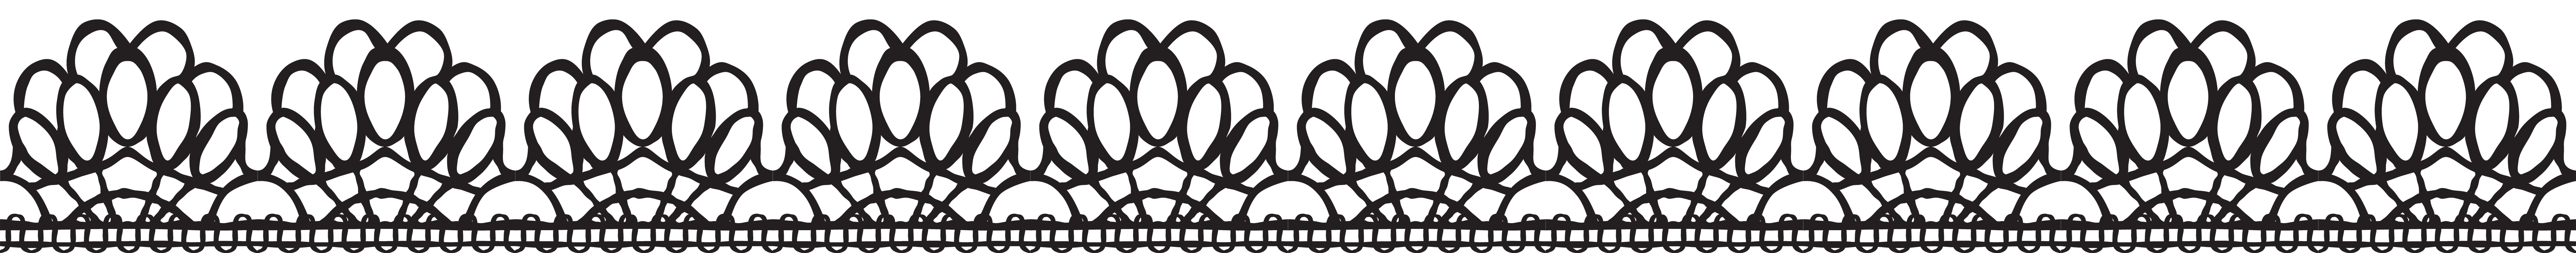 Lace border png. Clip art image gallery